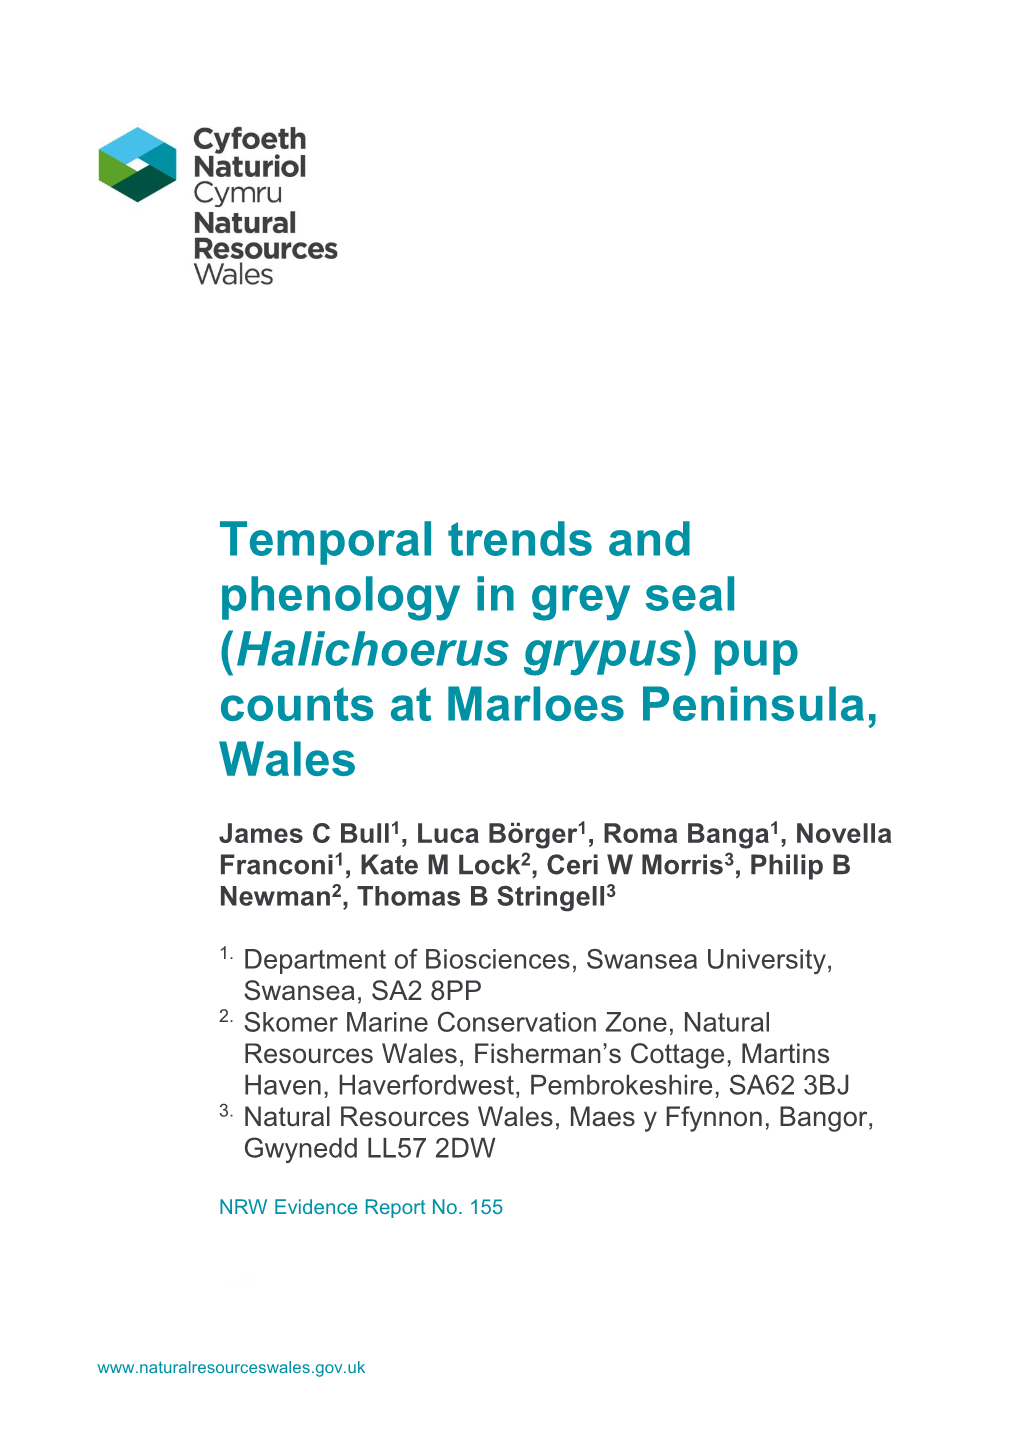 Temporal Trends and Phenology in Grey Seal (Halichoerus Grypus) Pup Counts at Marloes Peninsula, Wales